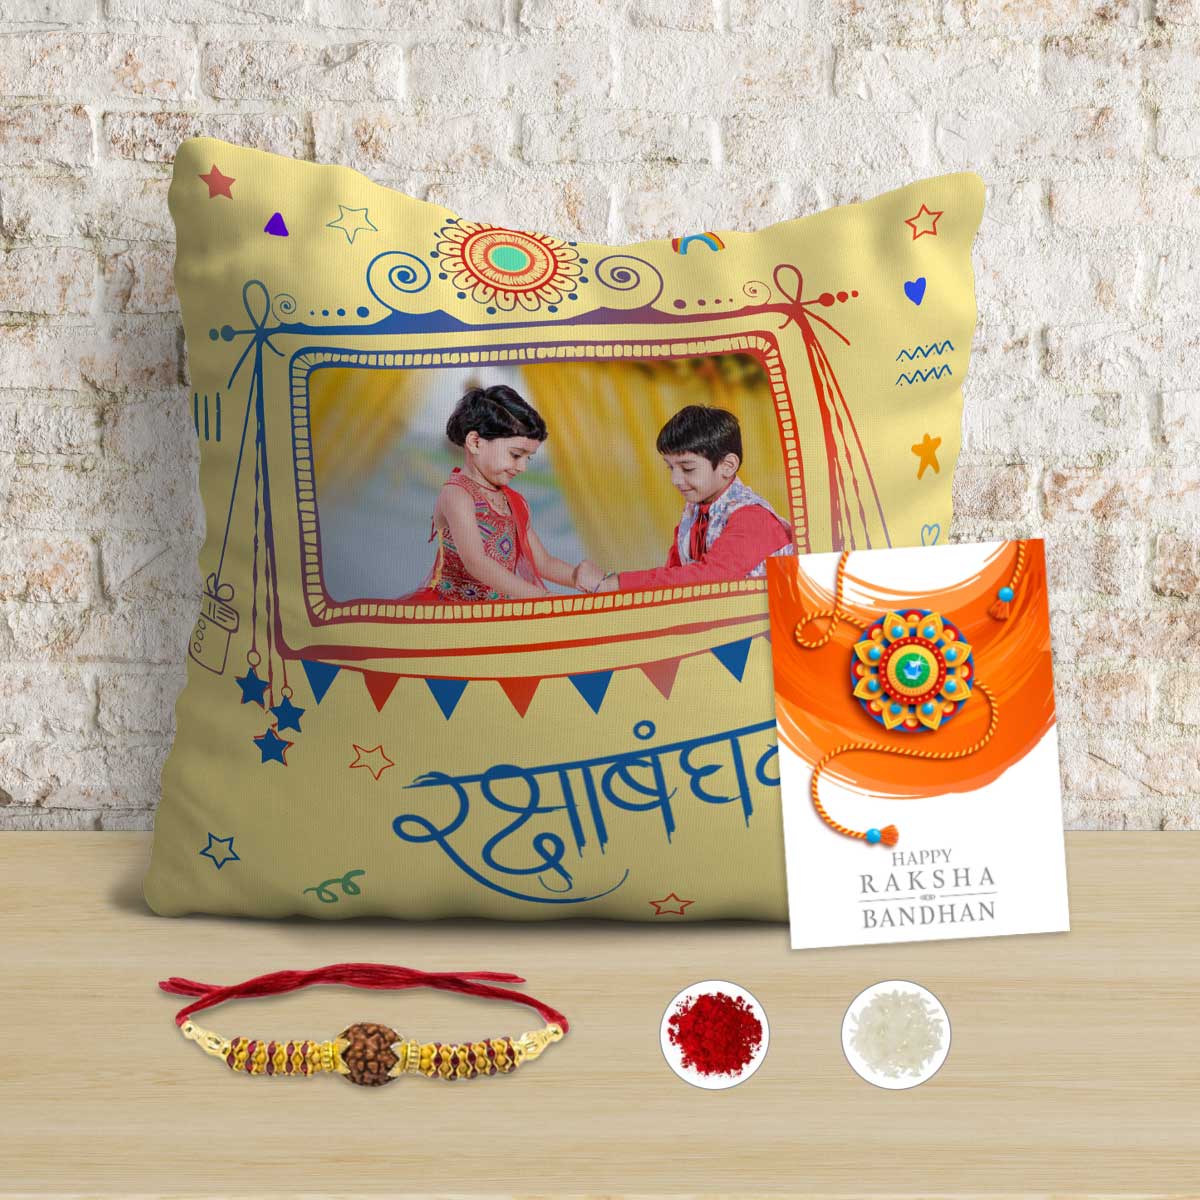 Out-Of-The-Box Rakhi Gift Ideas for Brother & Sister | Blog - MyFlowerTree